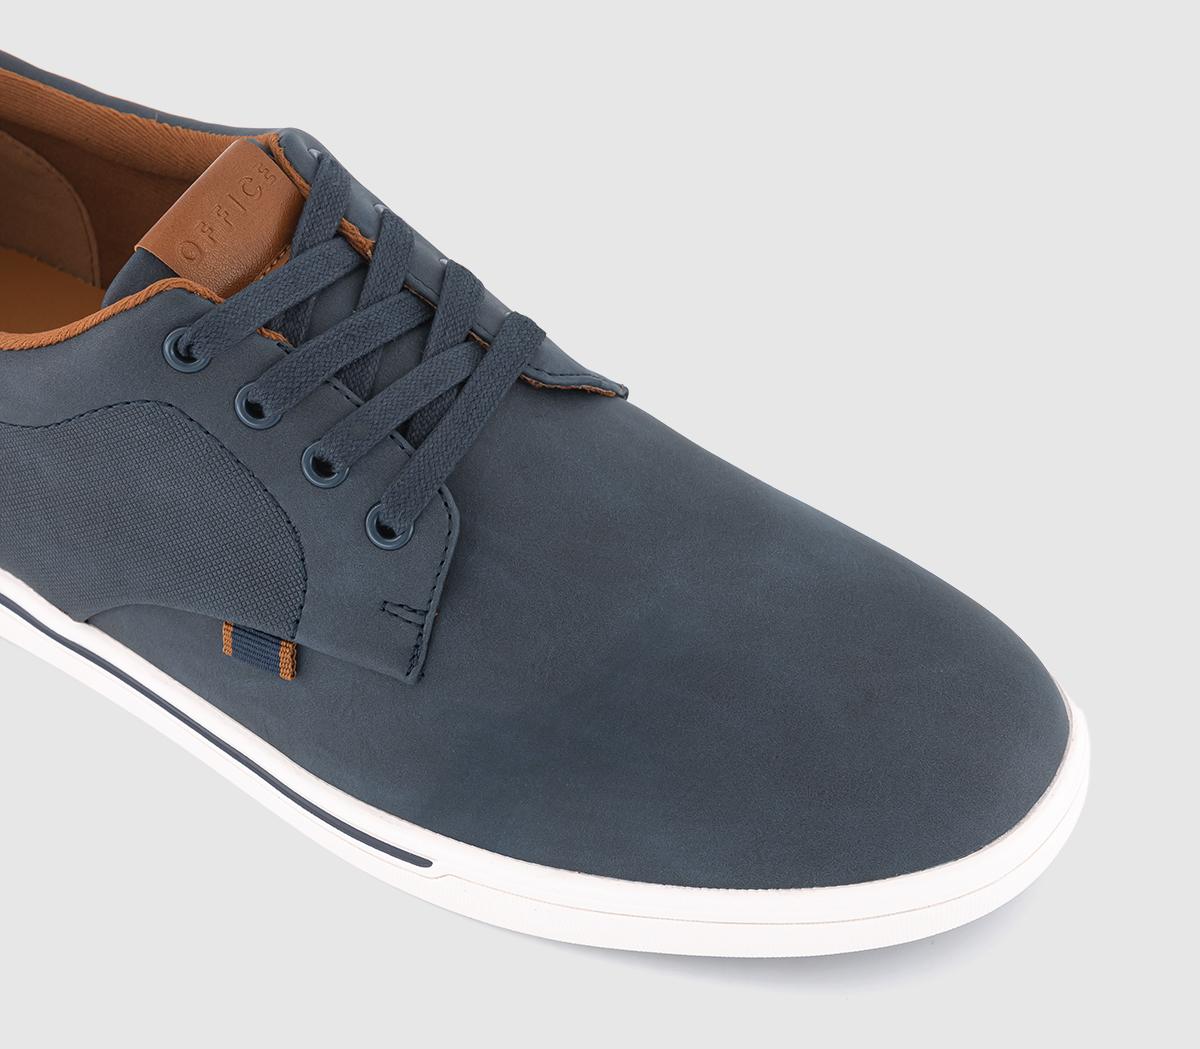 OFFICE Casey Perforated Lace Up Shoes Navy - Men's Casual Shoes